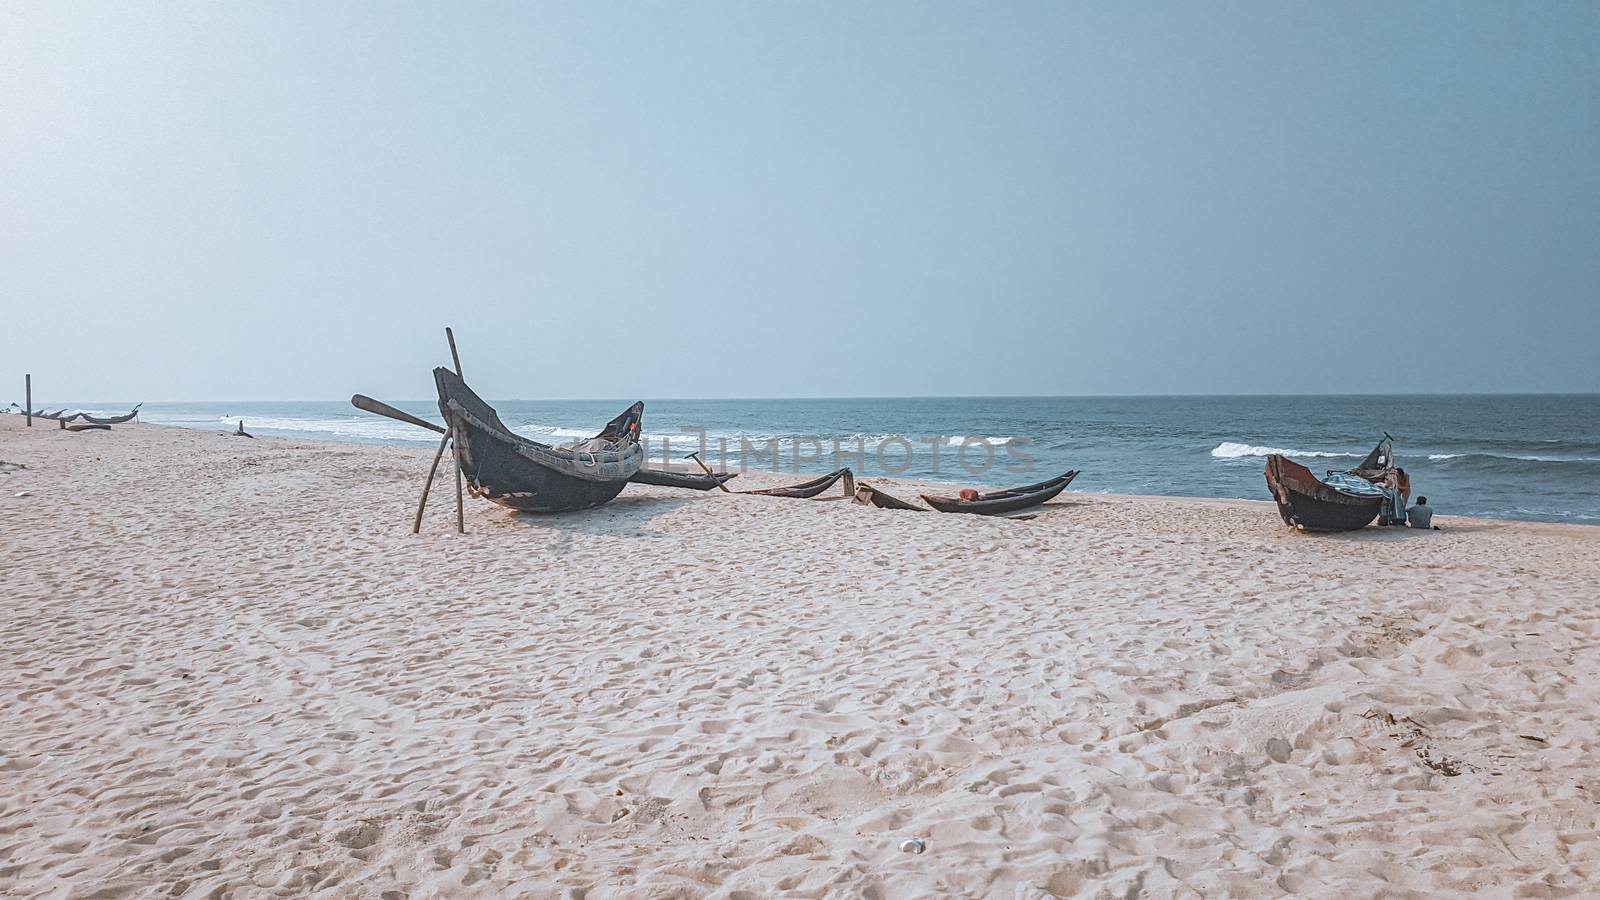 Vietnamese Fishing Boats moored at the beach by Sonnet15